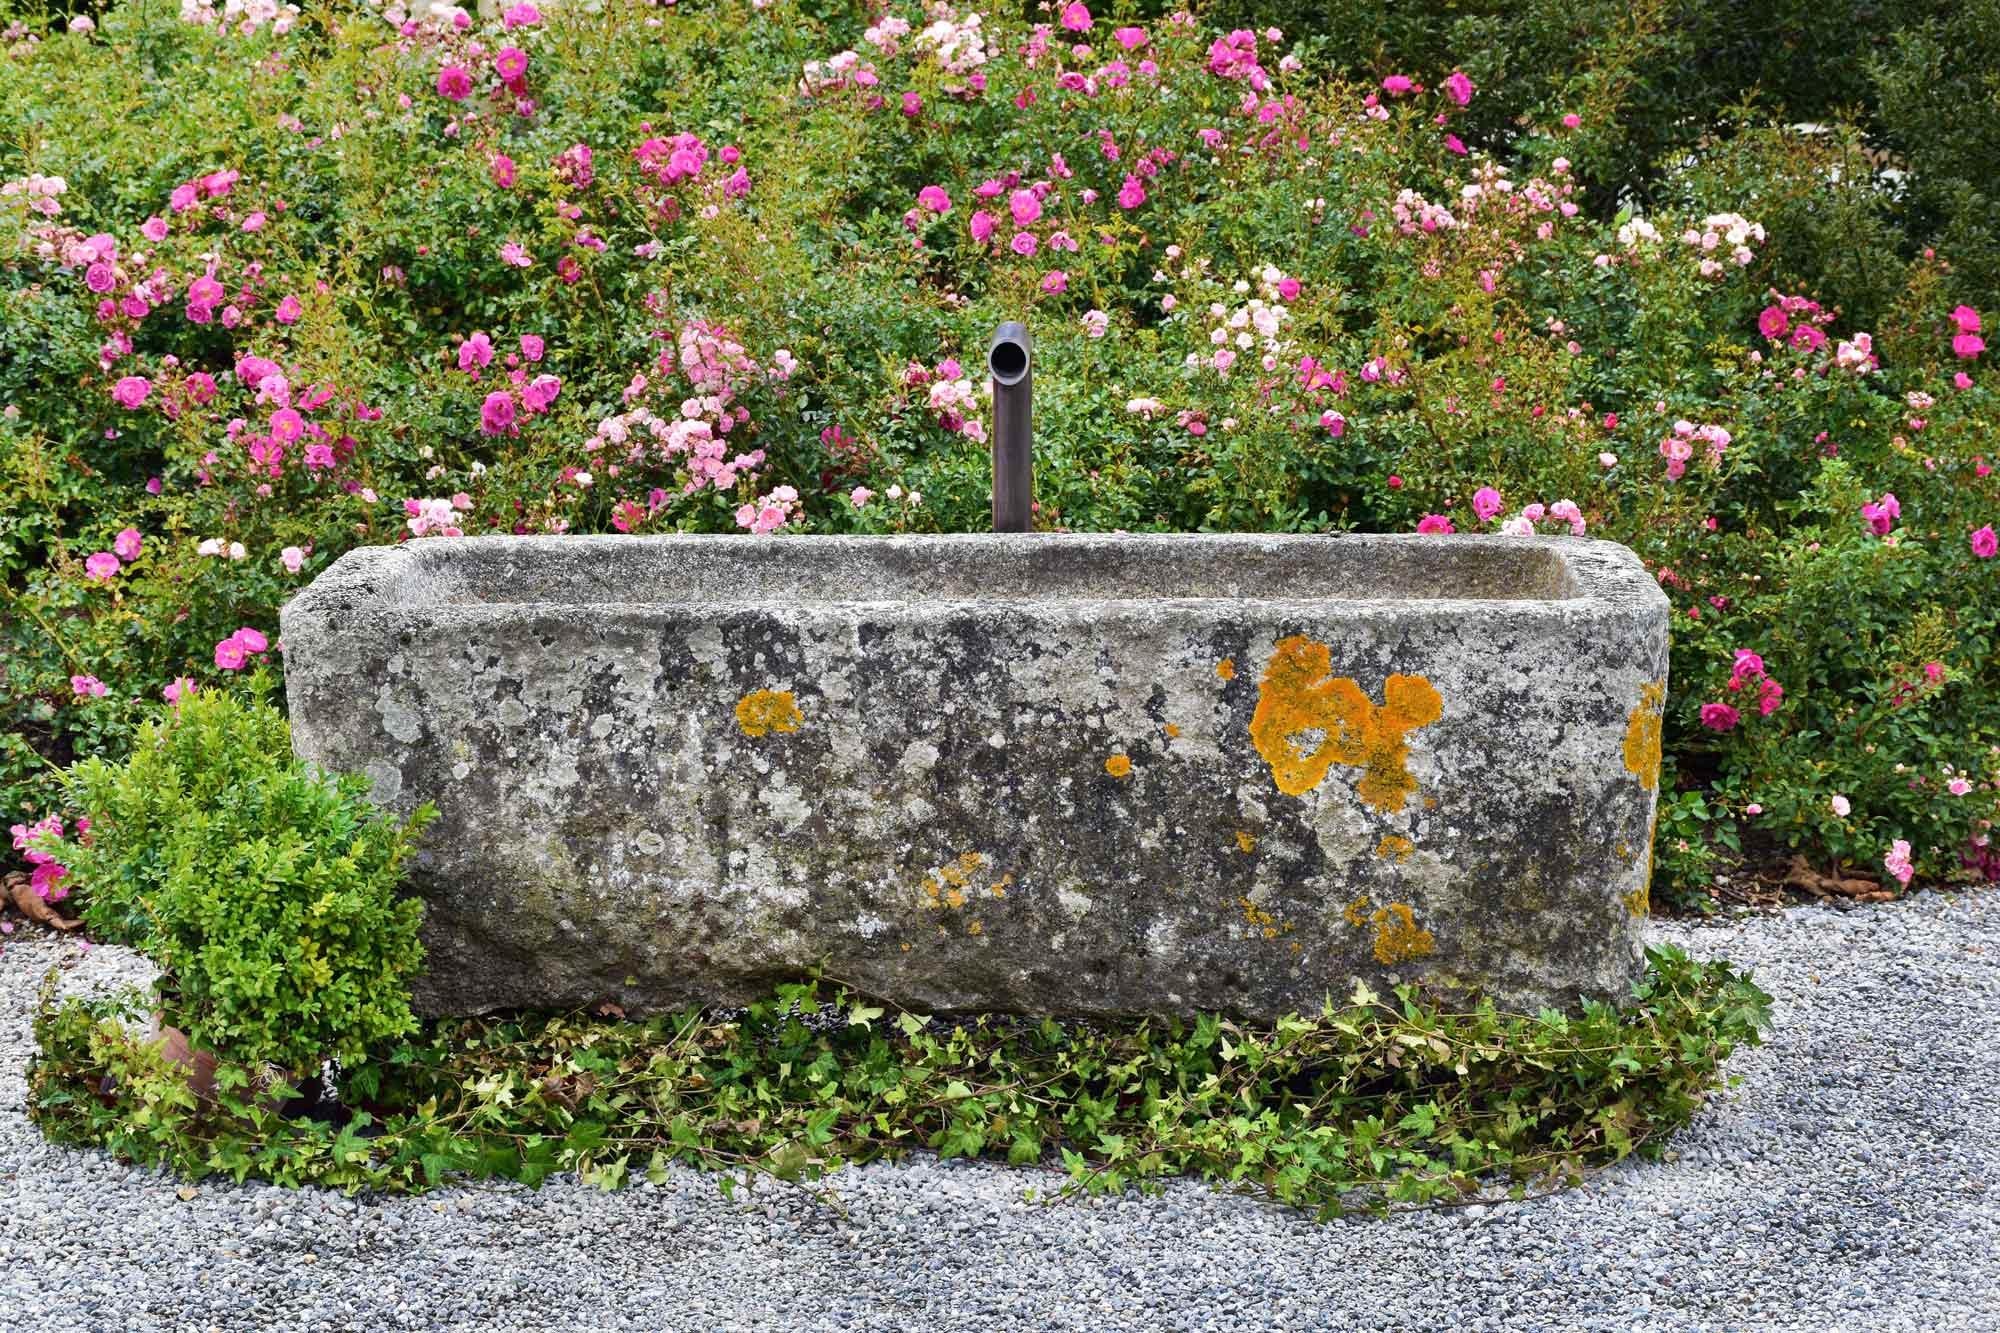 This small granite trough has a nice patina and a curved line. The shape is not perfectly straight but this makes it even more special. The trough has a nice size and it looks perfect in a garden full of flowers.